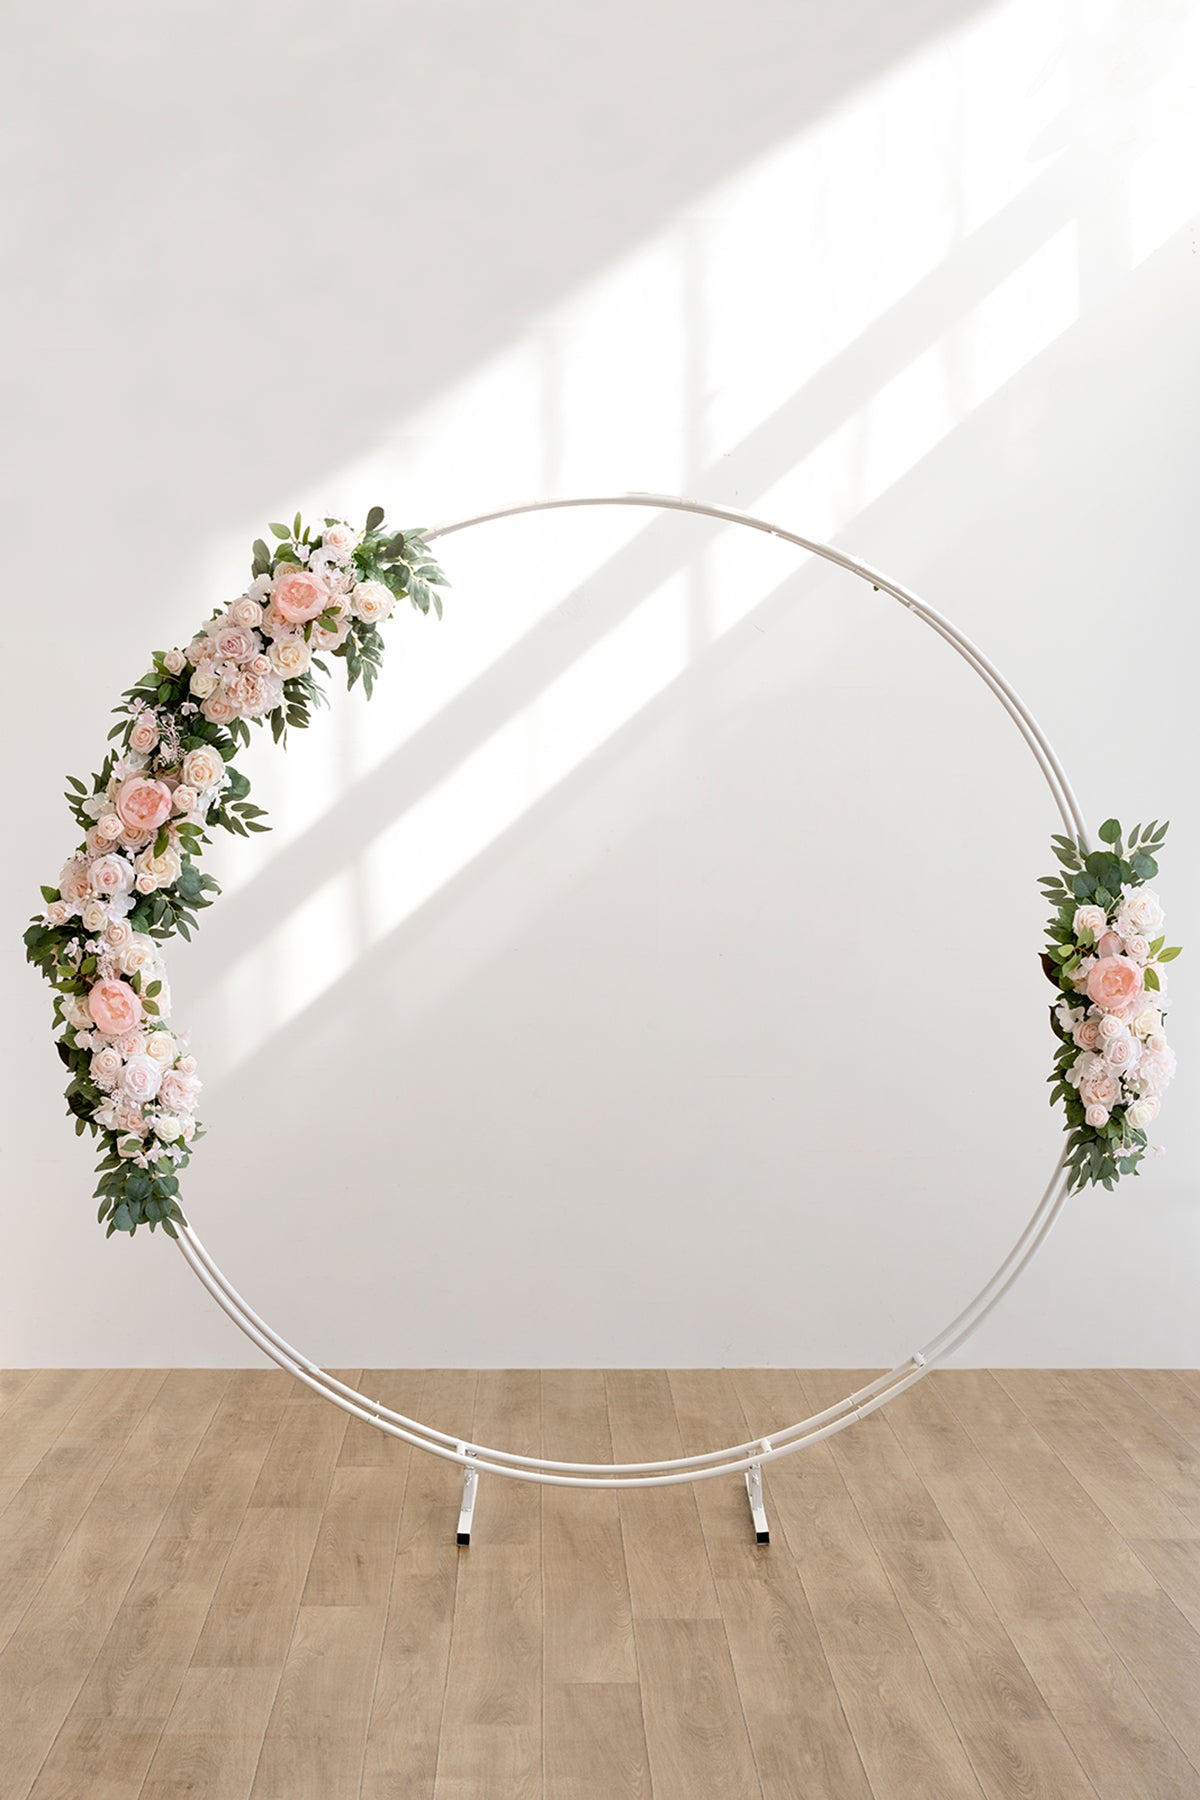 Flower Arrangements for Arch Decor in Blush & Cream | Clearance